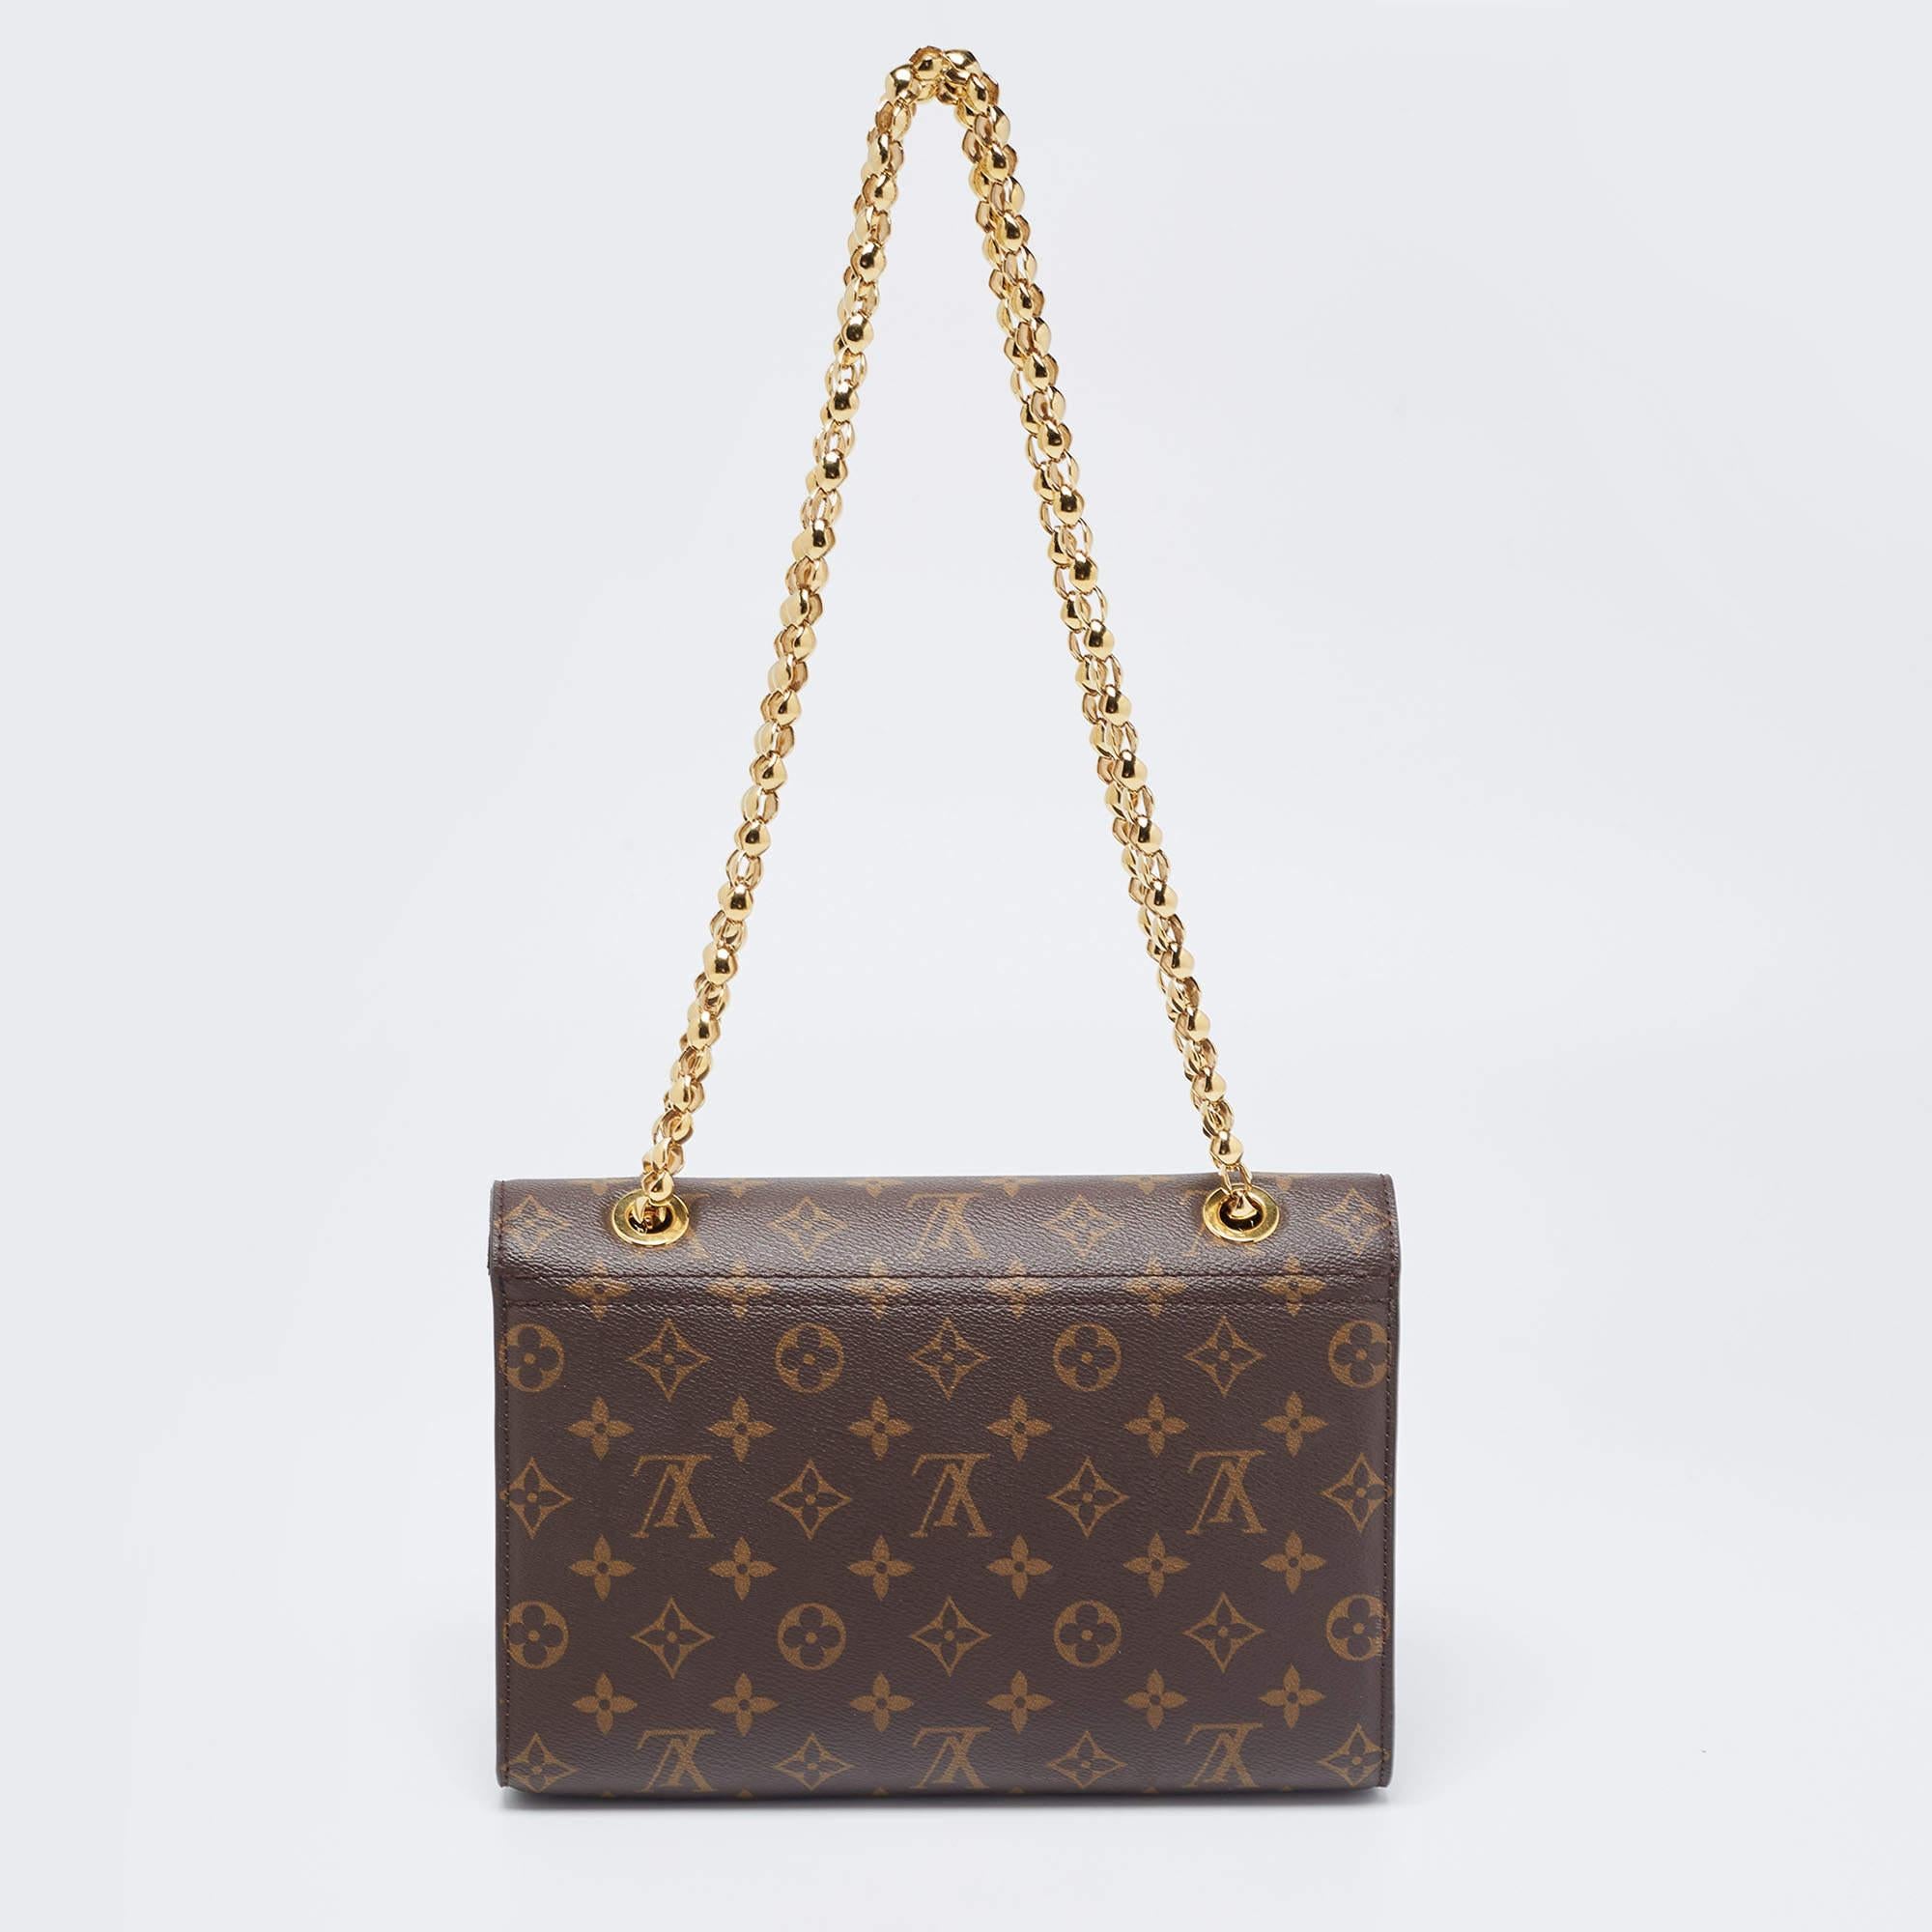 The fashion house’s tradition of excellence, coupled with modern design sensibilities, works to make this Louis Vuitton Victoire bag one of a kind. It's a fabulous accessory for everyday use.

Includes: Original Dustbag, Brand Box